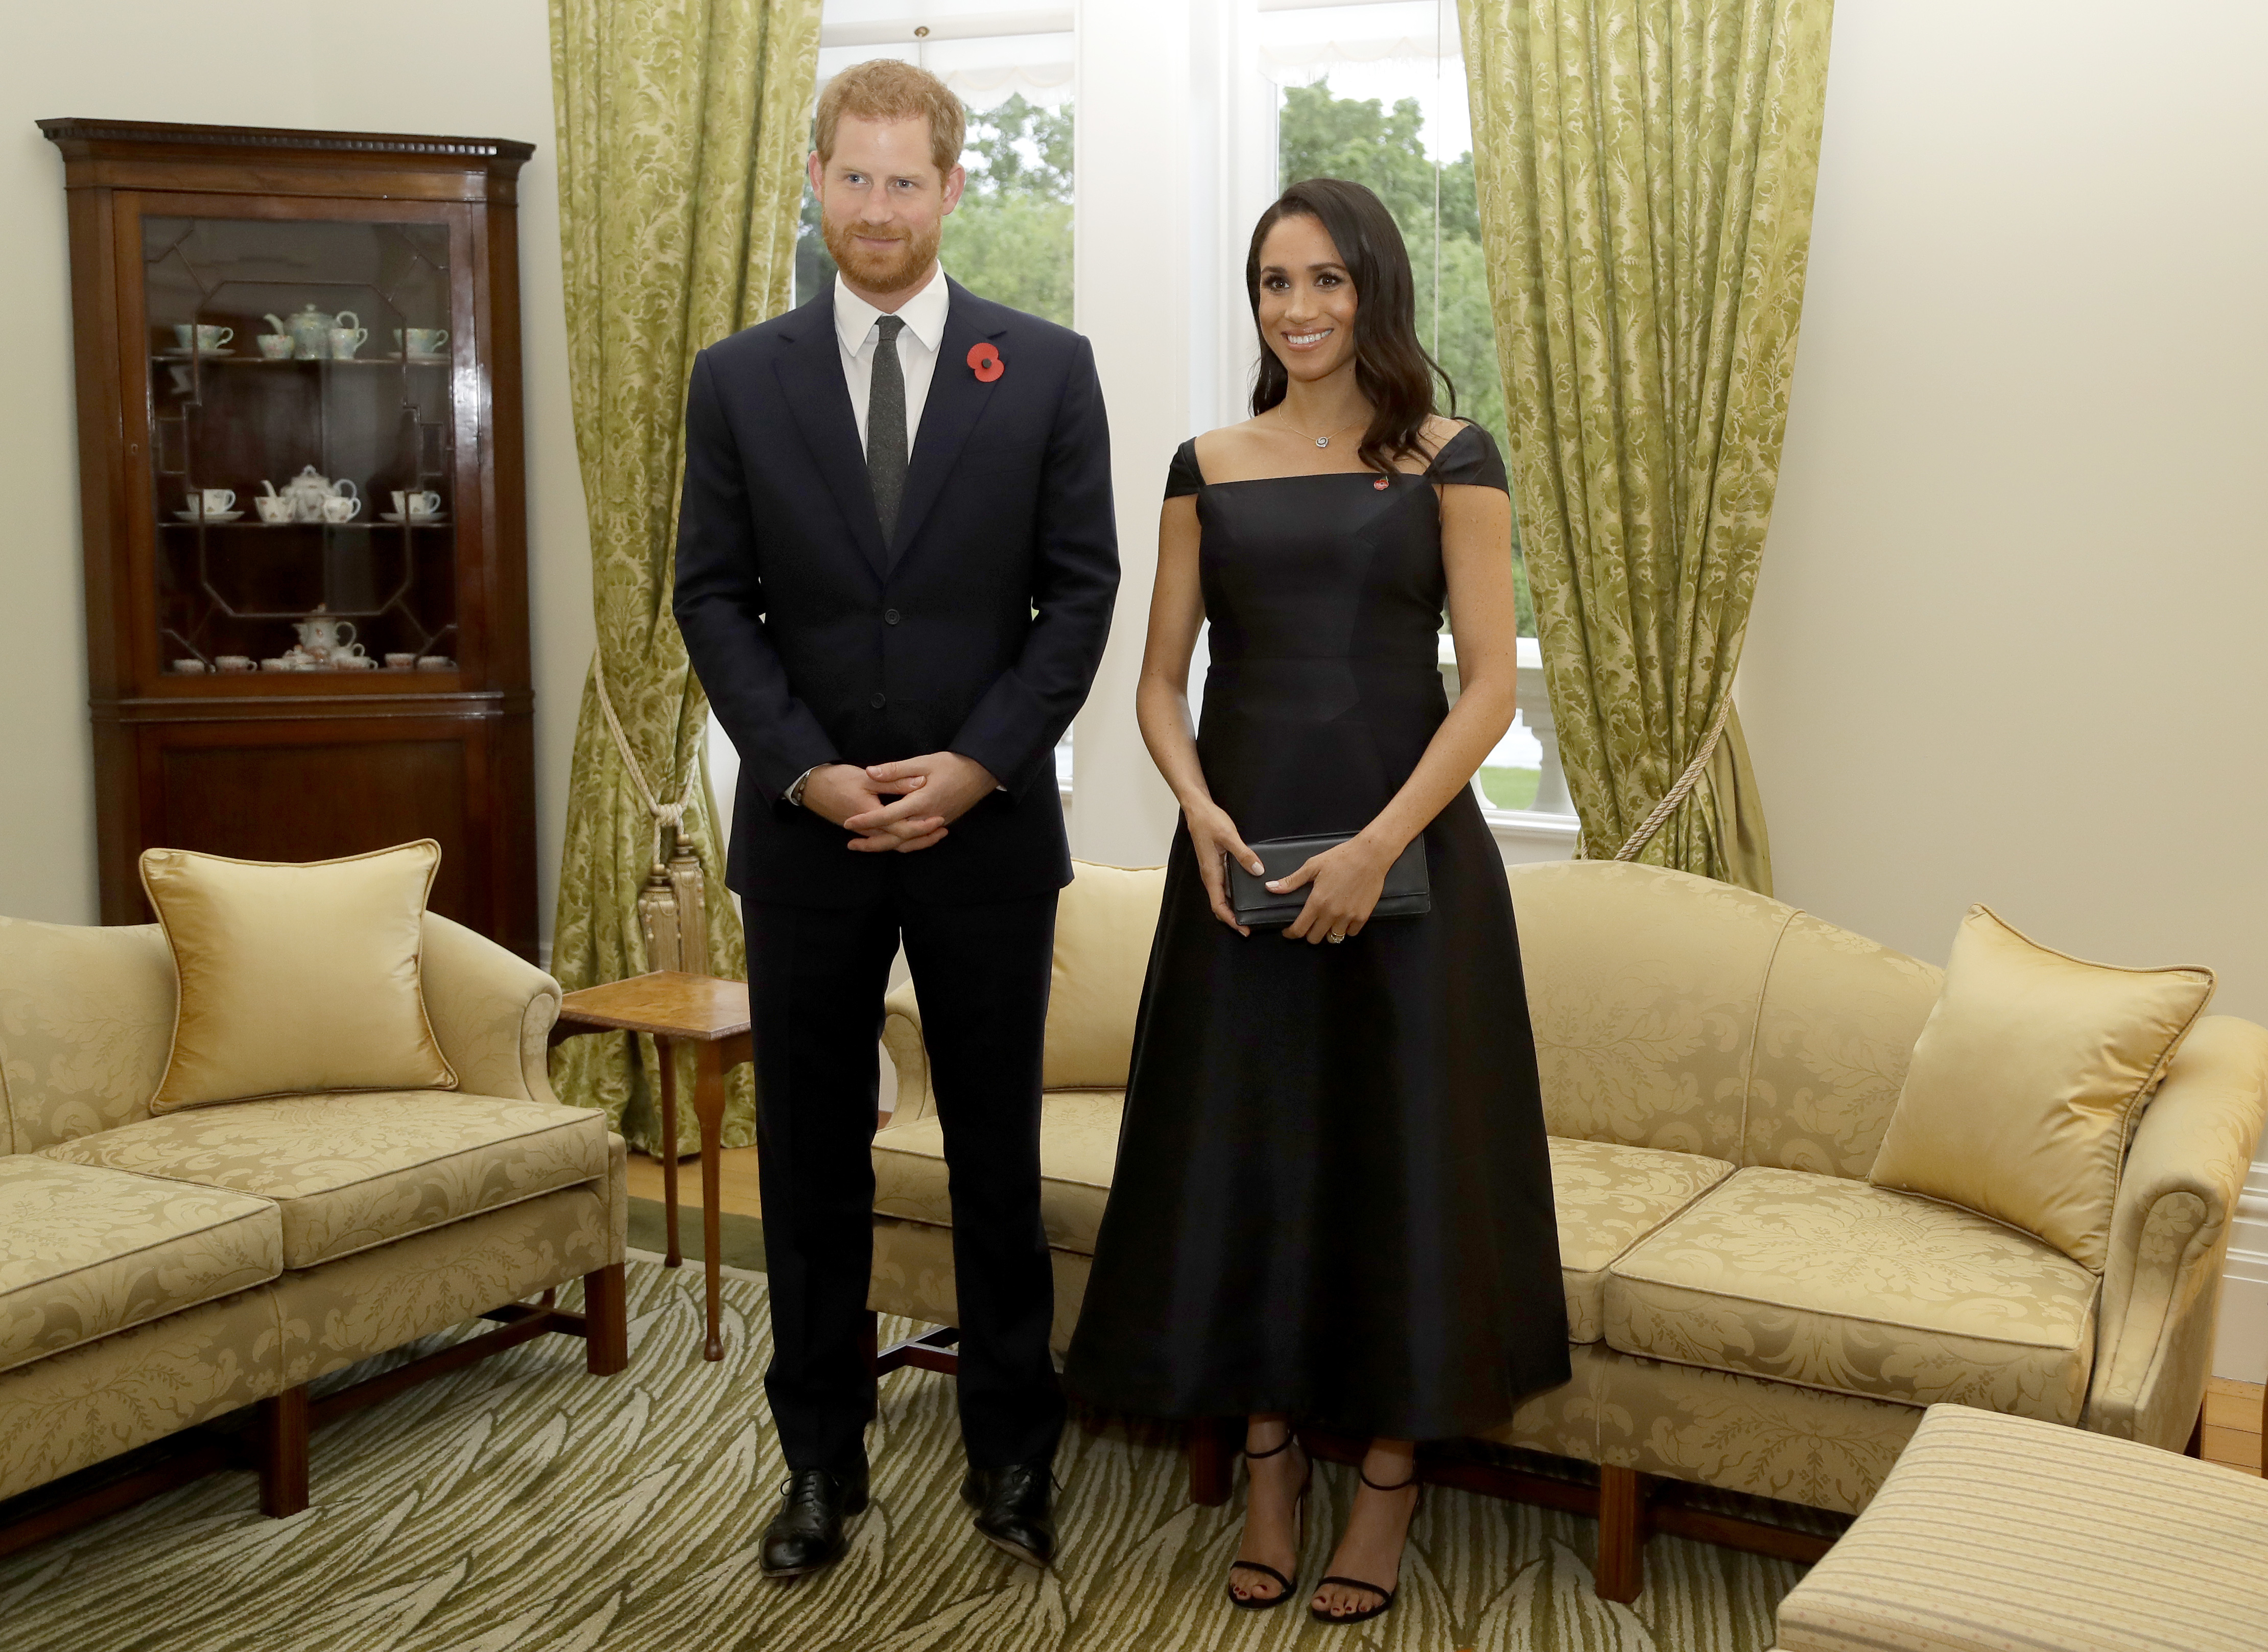 WELLINGTON, NEW ZEALAND - OCTOBER 28: Prince Harry, Duke of Sussex and Meghan, Duchess of Sussex wait to meet New Zealand Prime Minister Jacinda Ardern, at Government House on October 28, 2018 in Wellington, New Zealand. The Duke and Duchess of Sussex are on their official 16-day Autumn tour visiting cities in Australia, Fiji, Tonga and New Zealand. (Photo by Kirsty Wigglesworth - Pool /Getty Images)